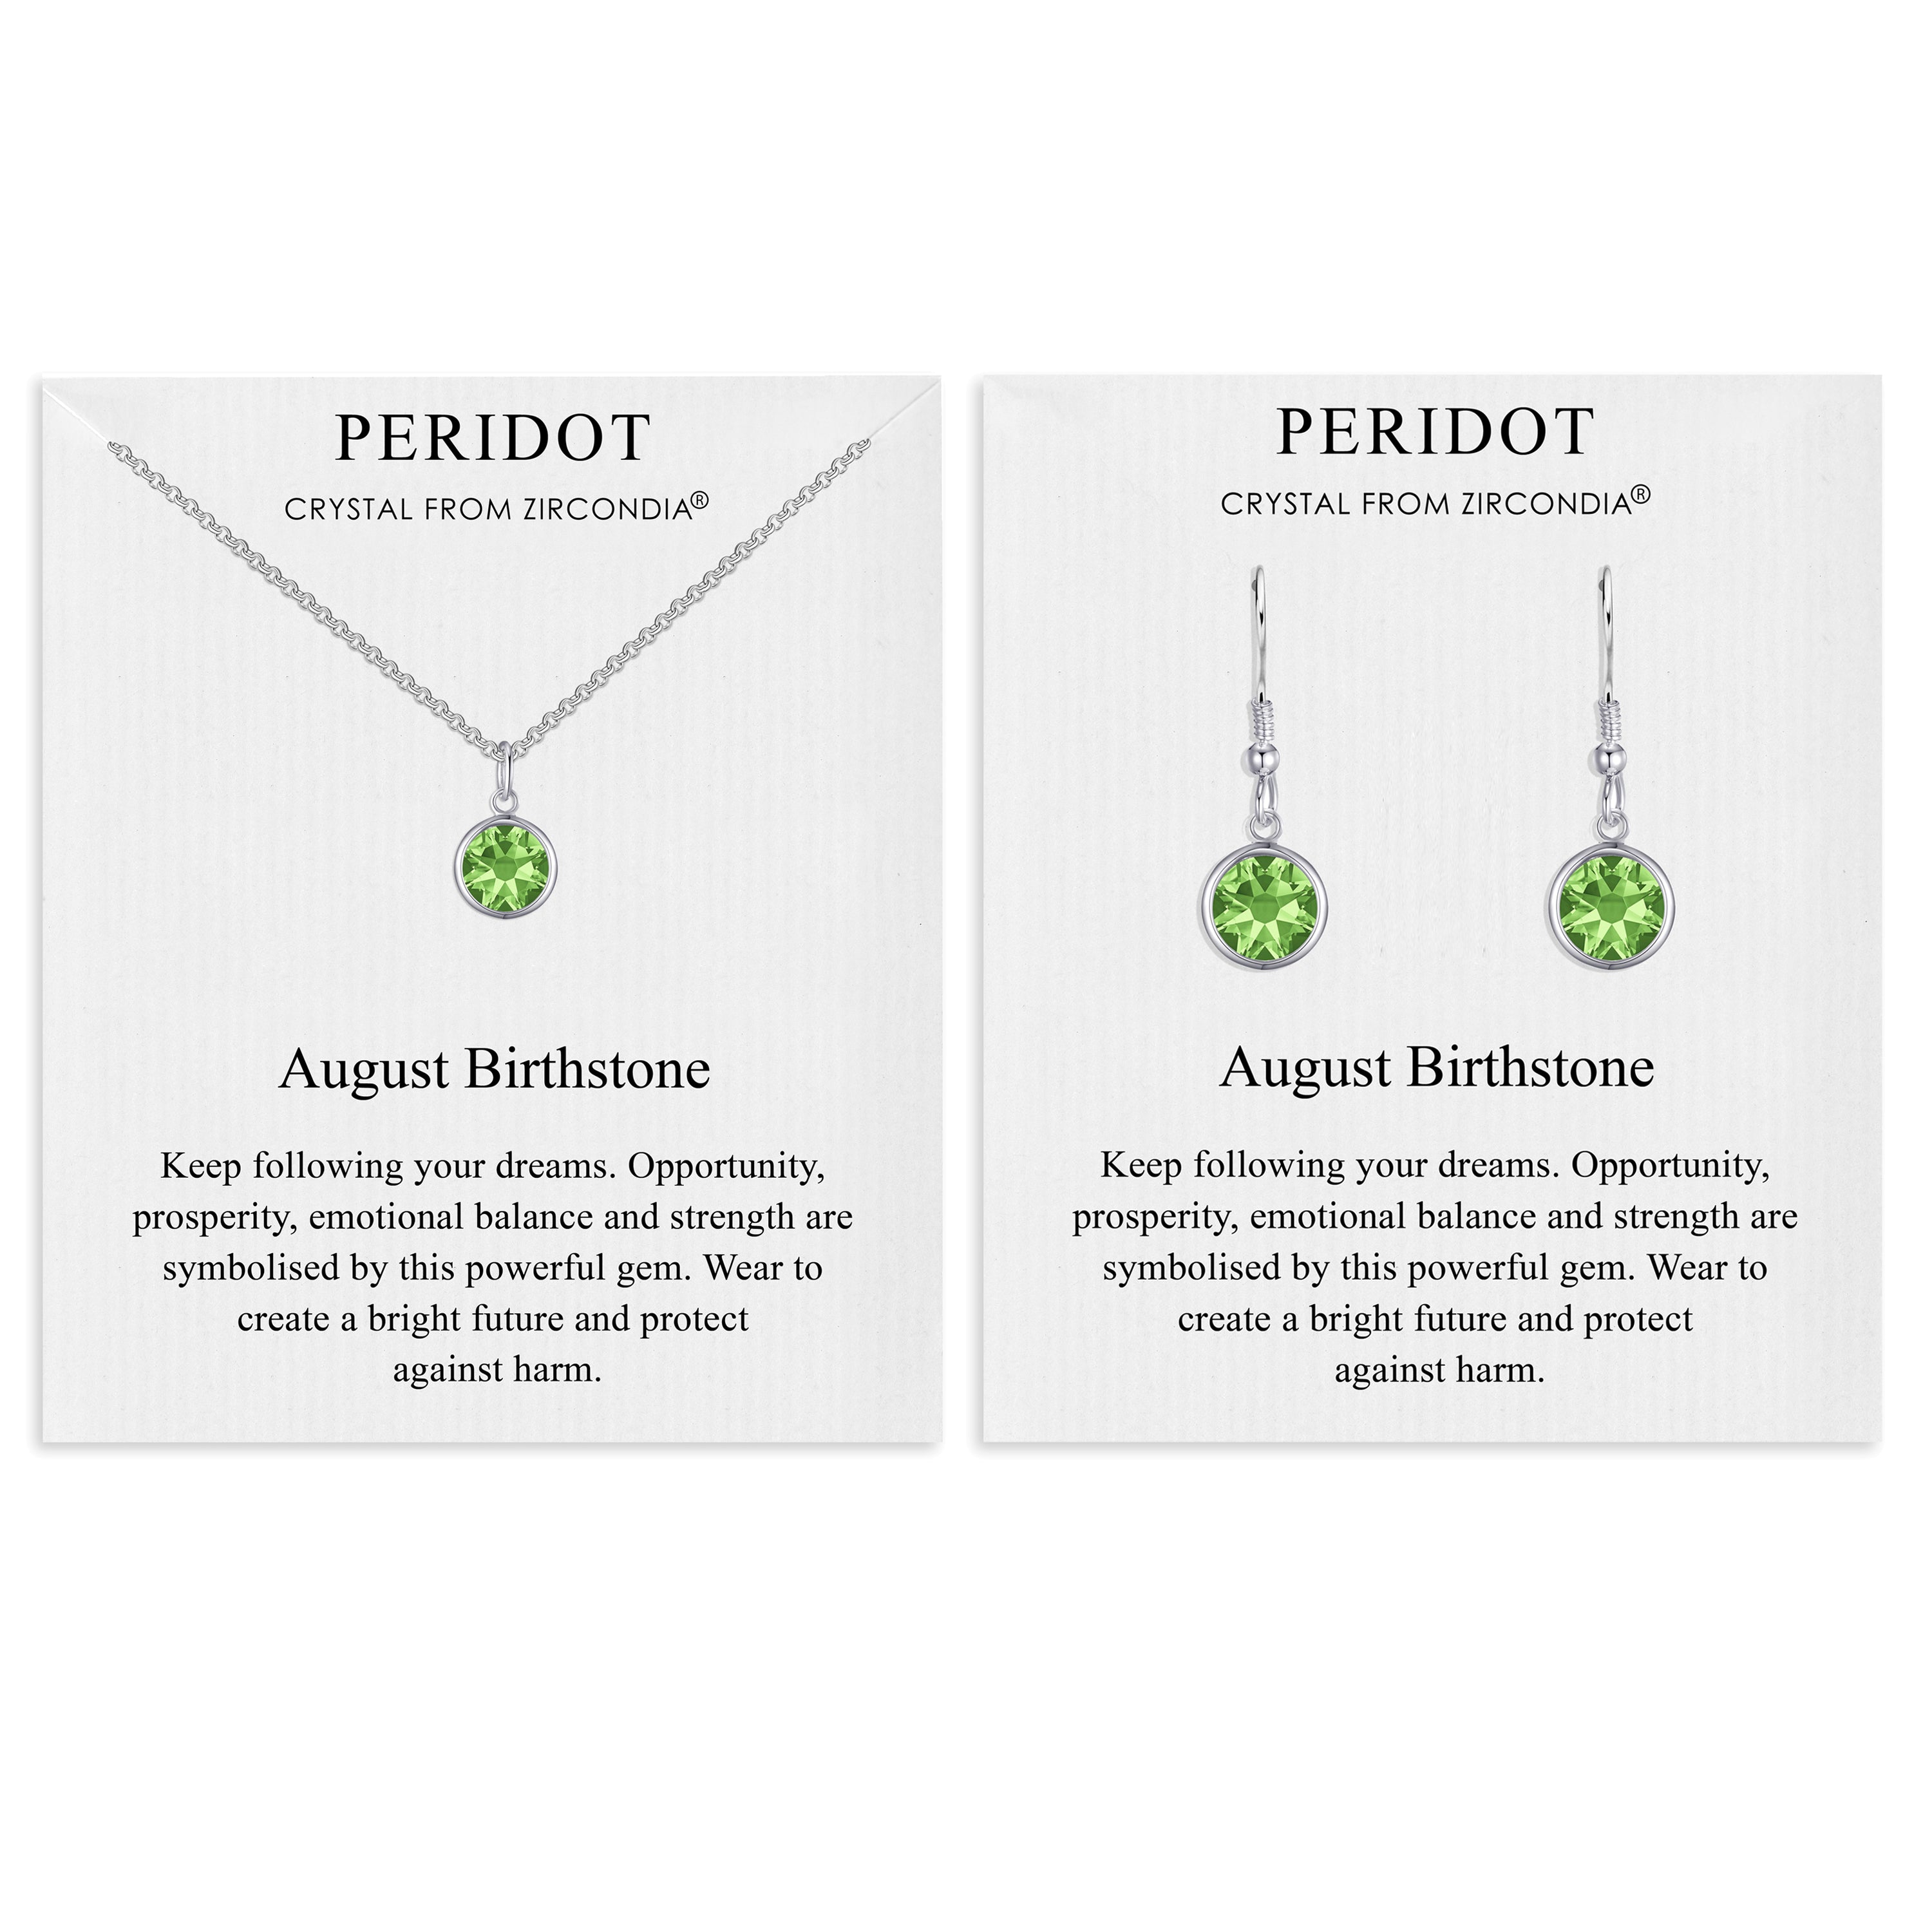 August (Peridot) Birthstone Necklace & Drop Earrings Set Created with Zircondia® Crystals by Philip Jones Jewellery